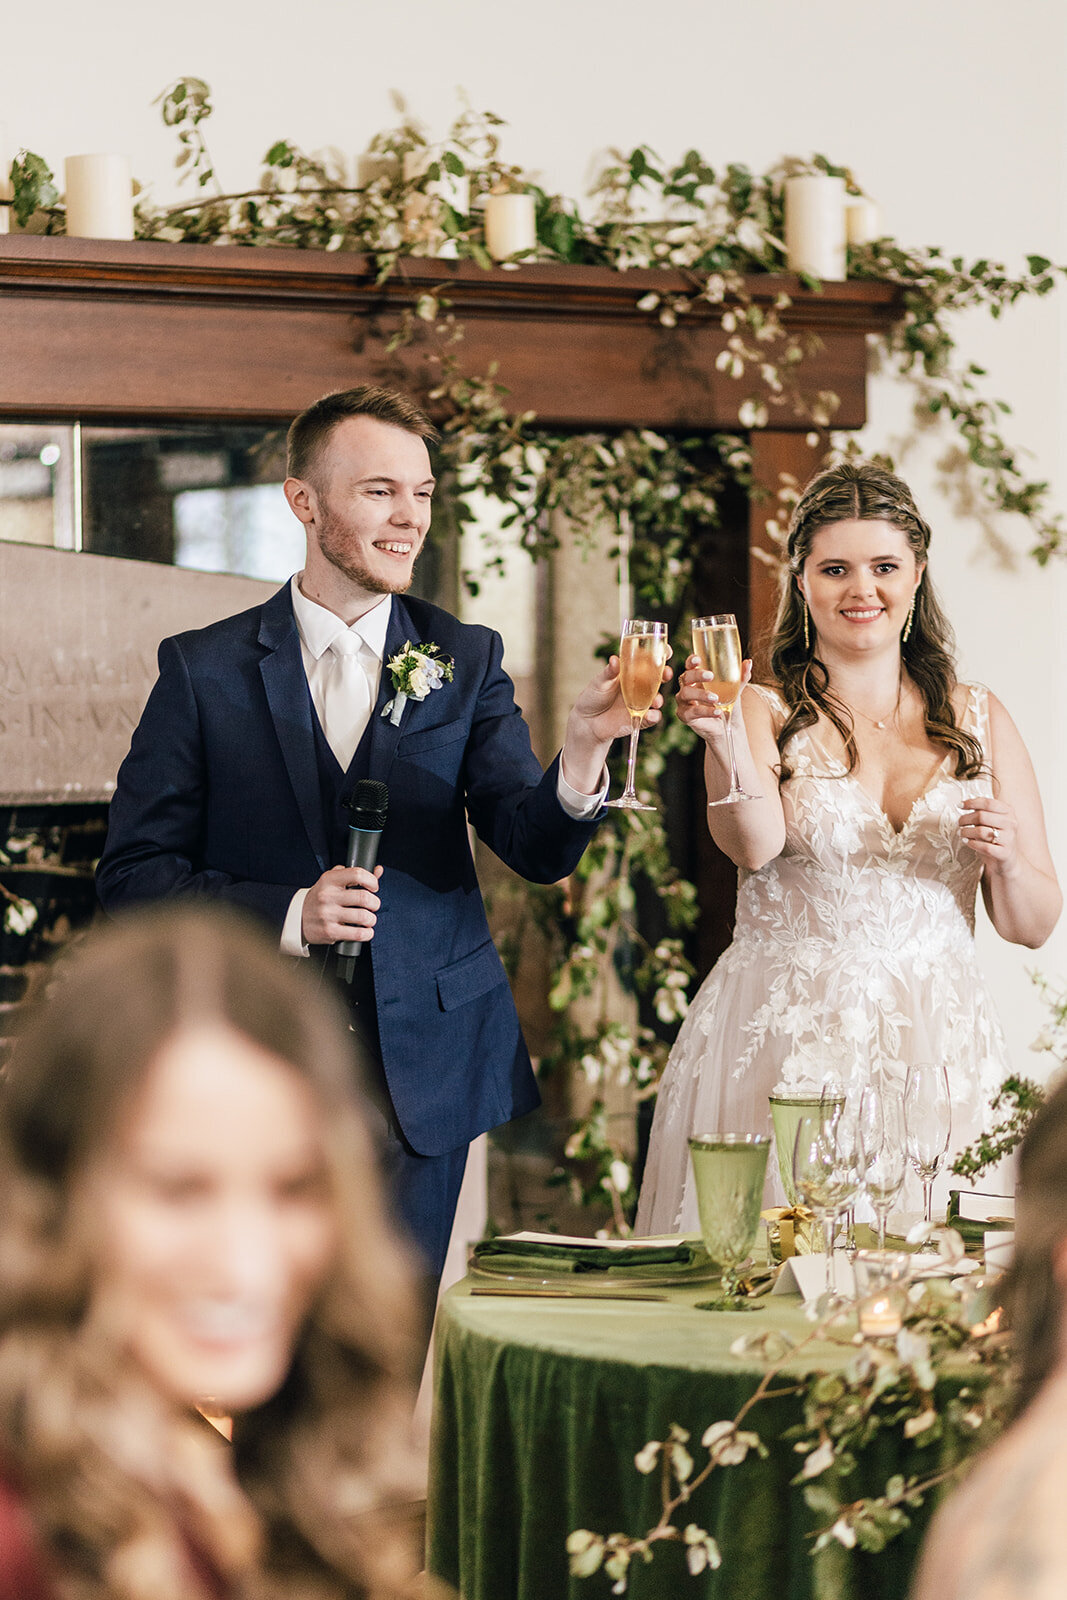 The Lodge at St Edward Wedding reception photos by joanna monger photography